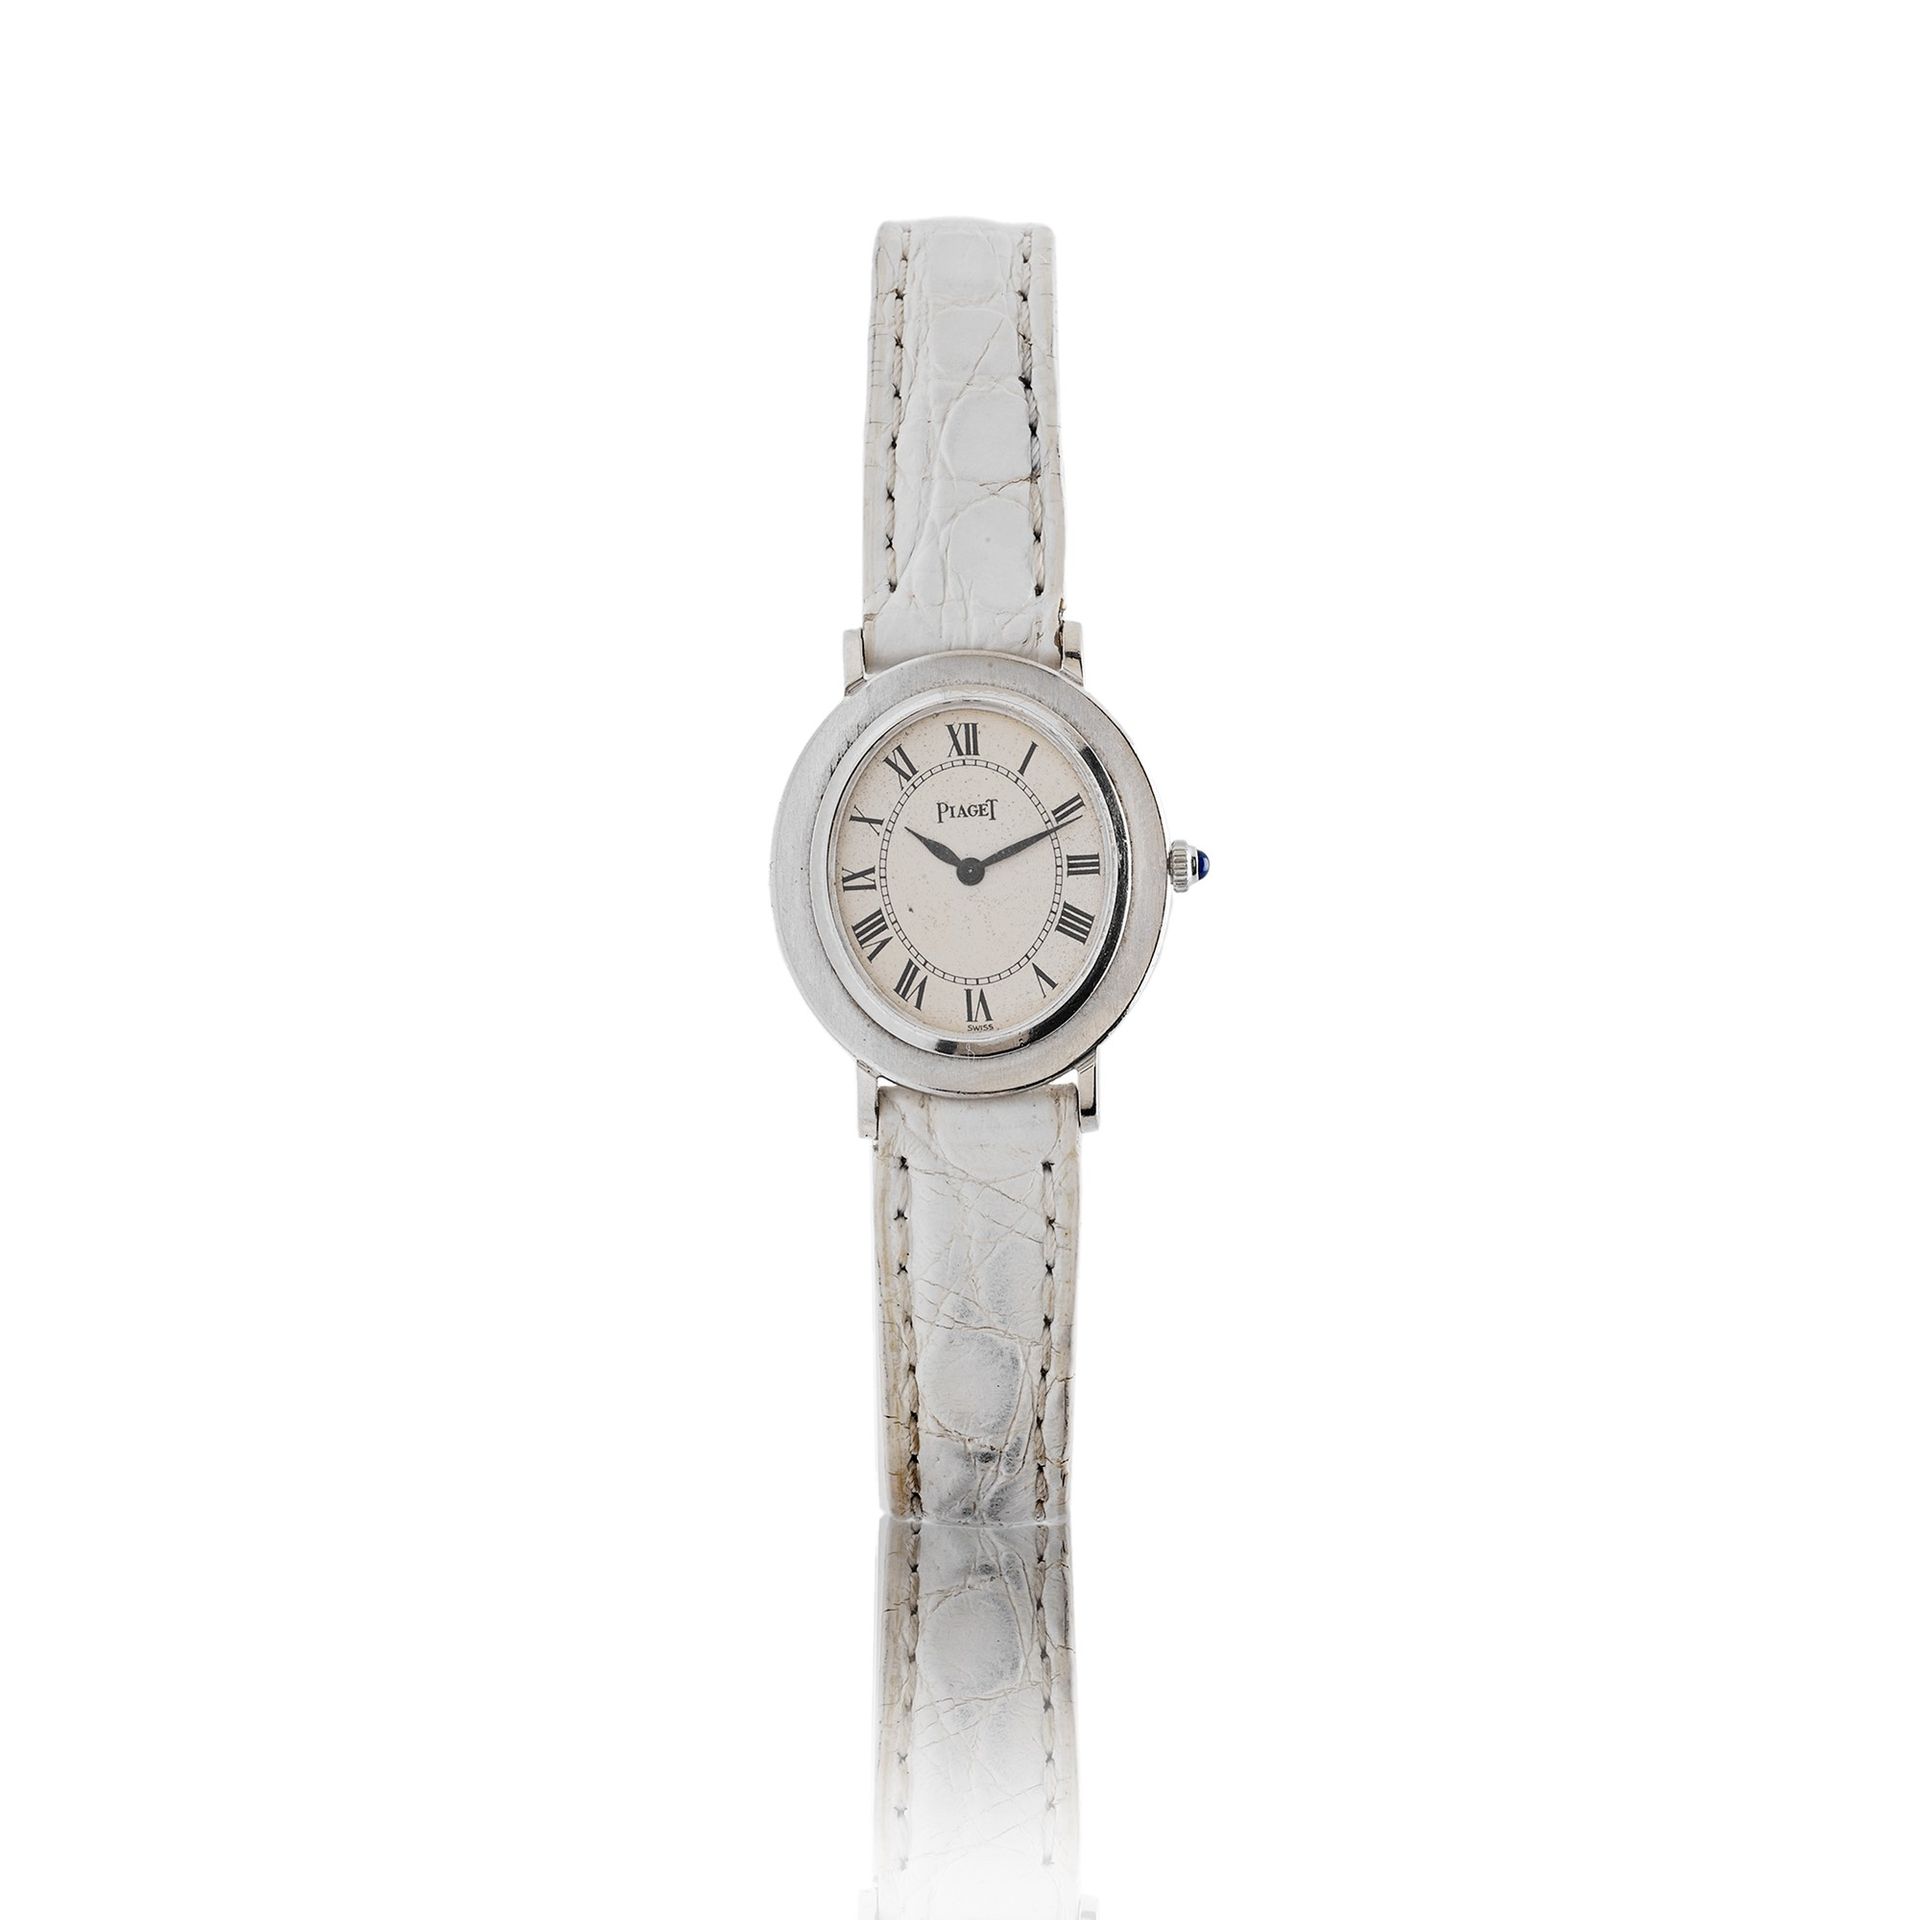 PIAGET Piaget, 1970s. 18kt white gold case, with white crocodile leather bracele&hellip;